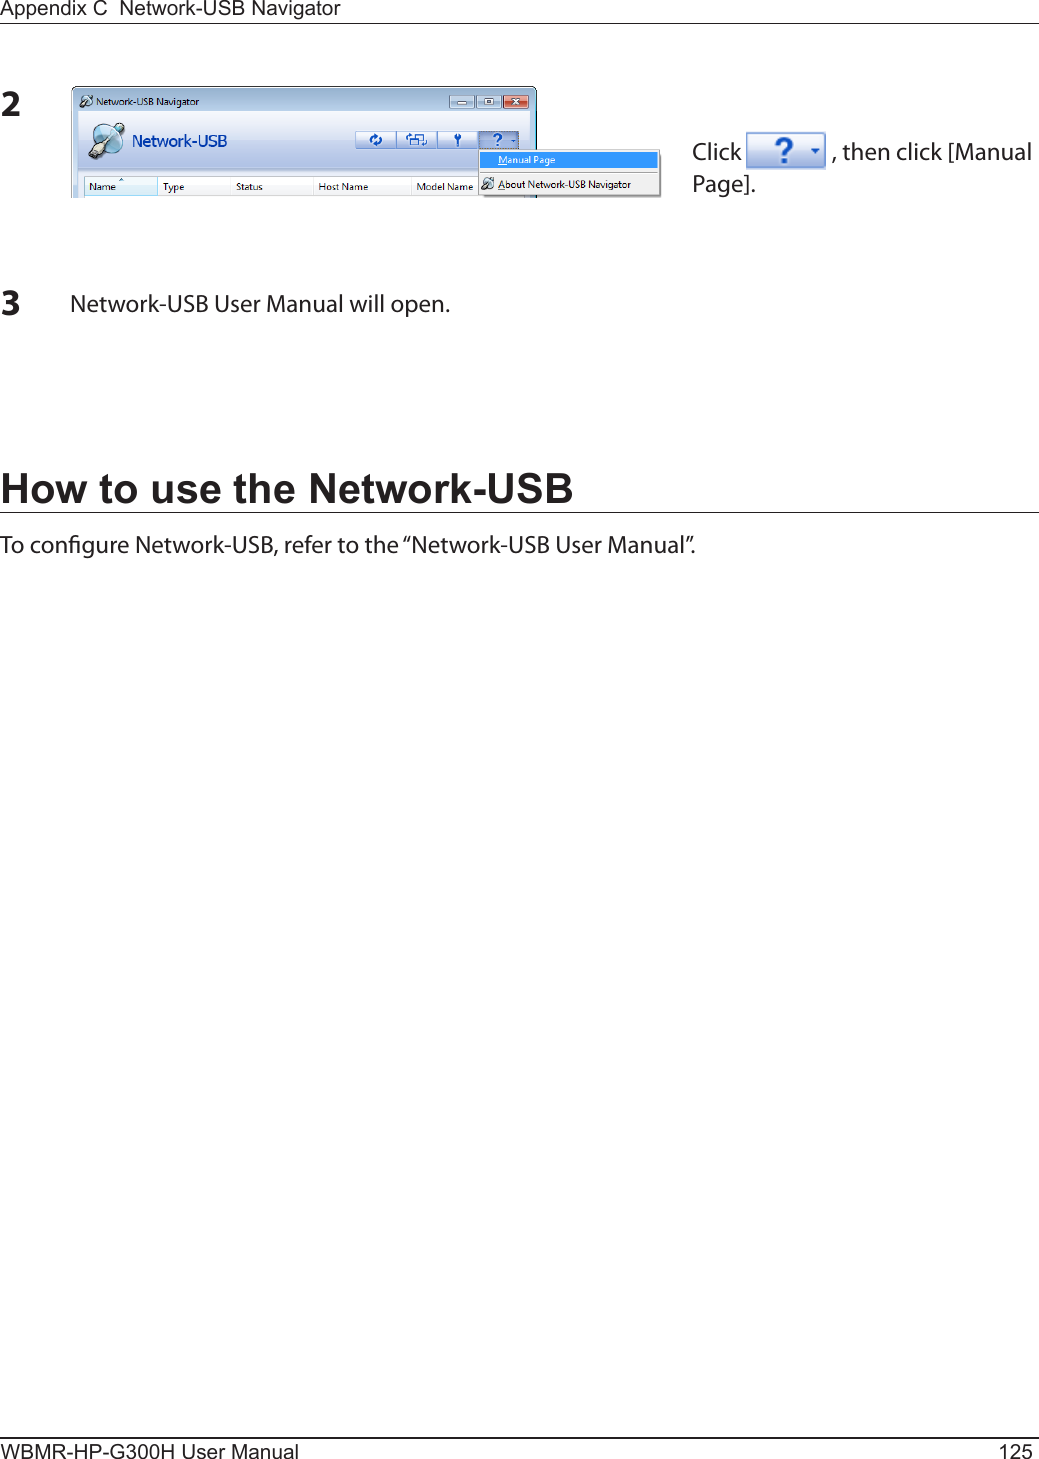 Appendix C  Network-USB NavigatorWBMR-HP-G300H User Manual 125How to use the Network-USBTo congure Network-USB, refer to the “Network-USB User Manual”.2Click   , then click [Manual Page]. 3Network-USB User Manual will open.